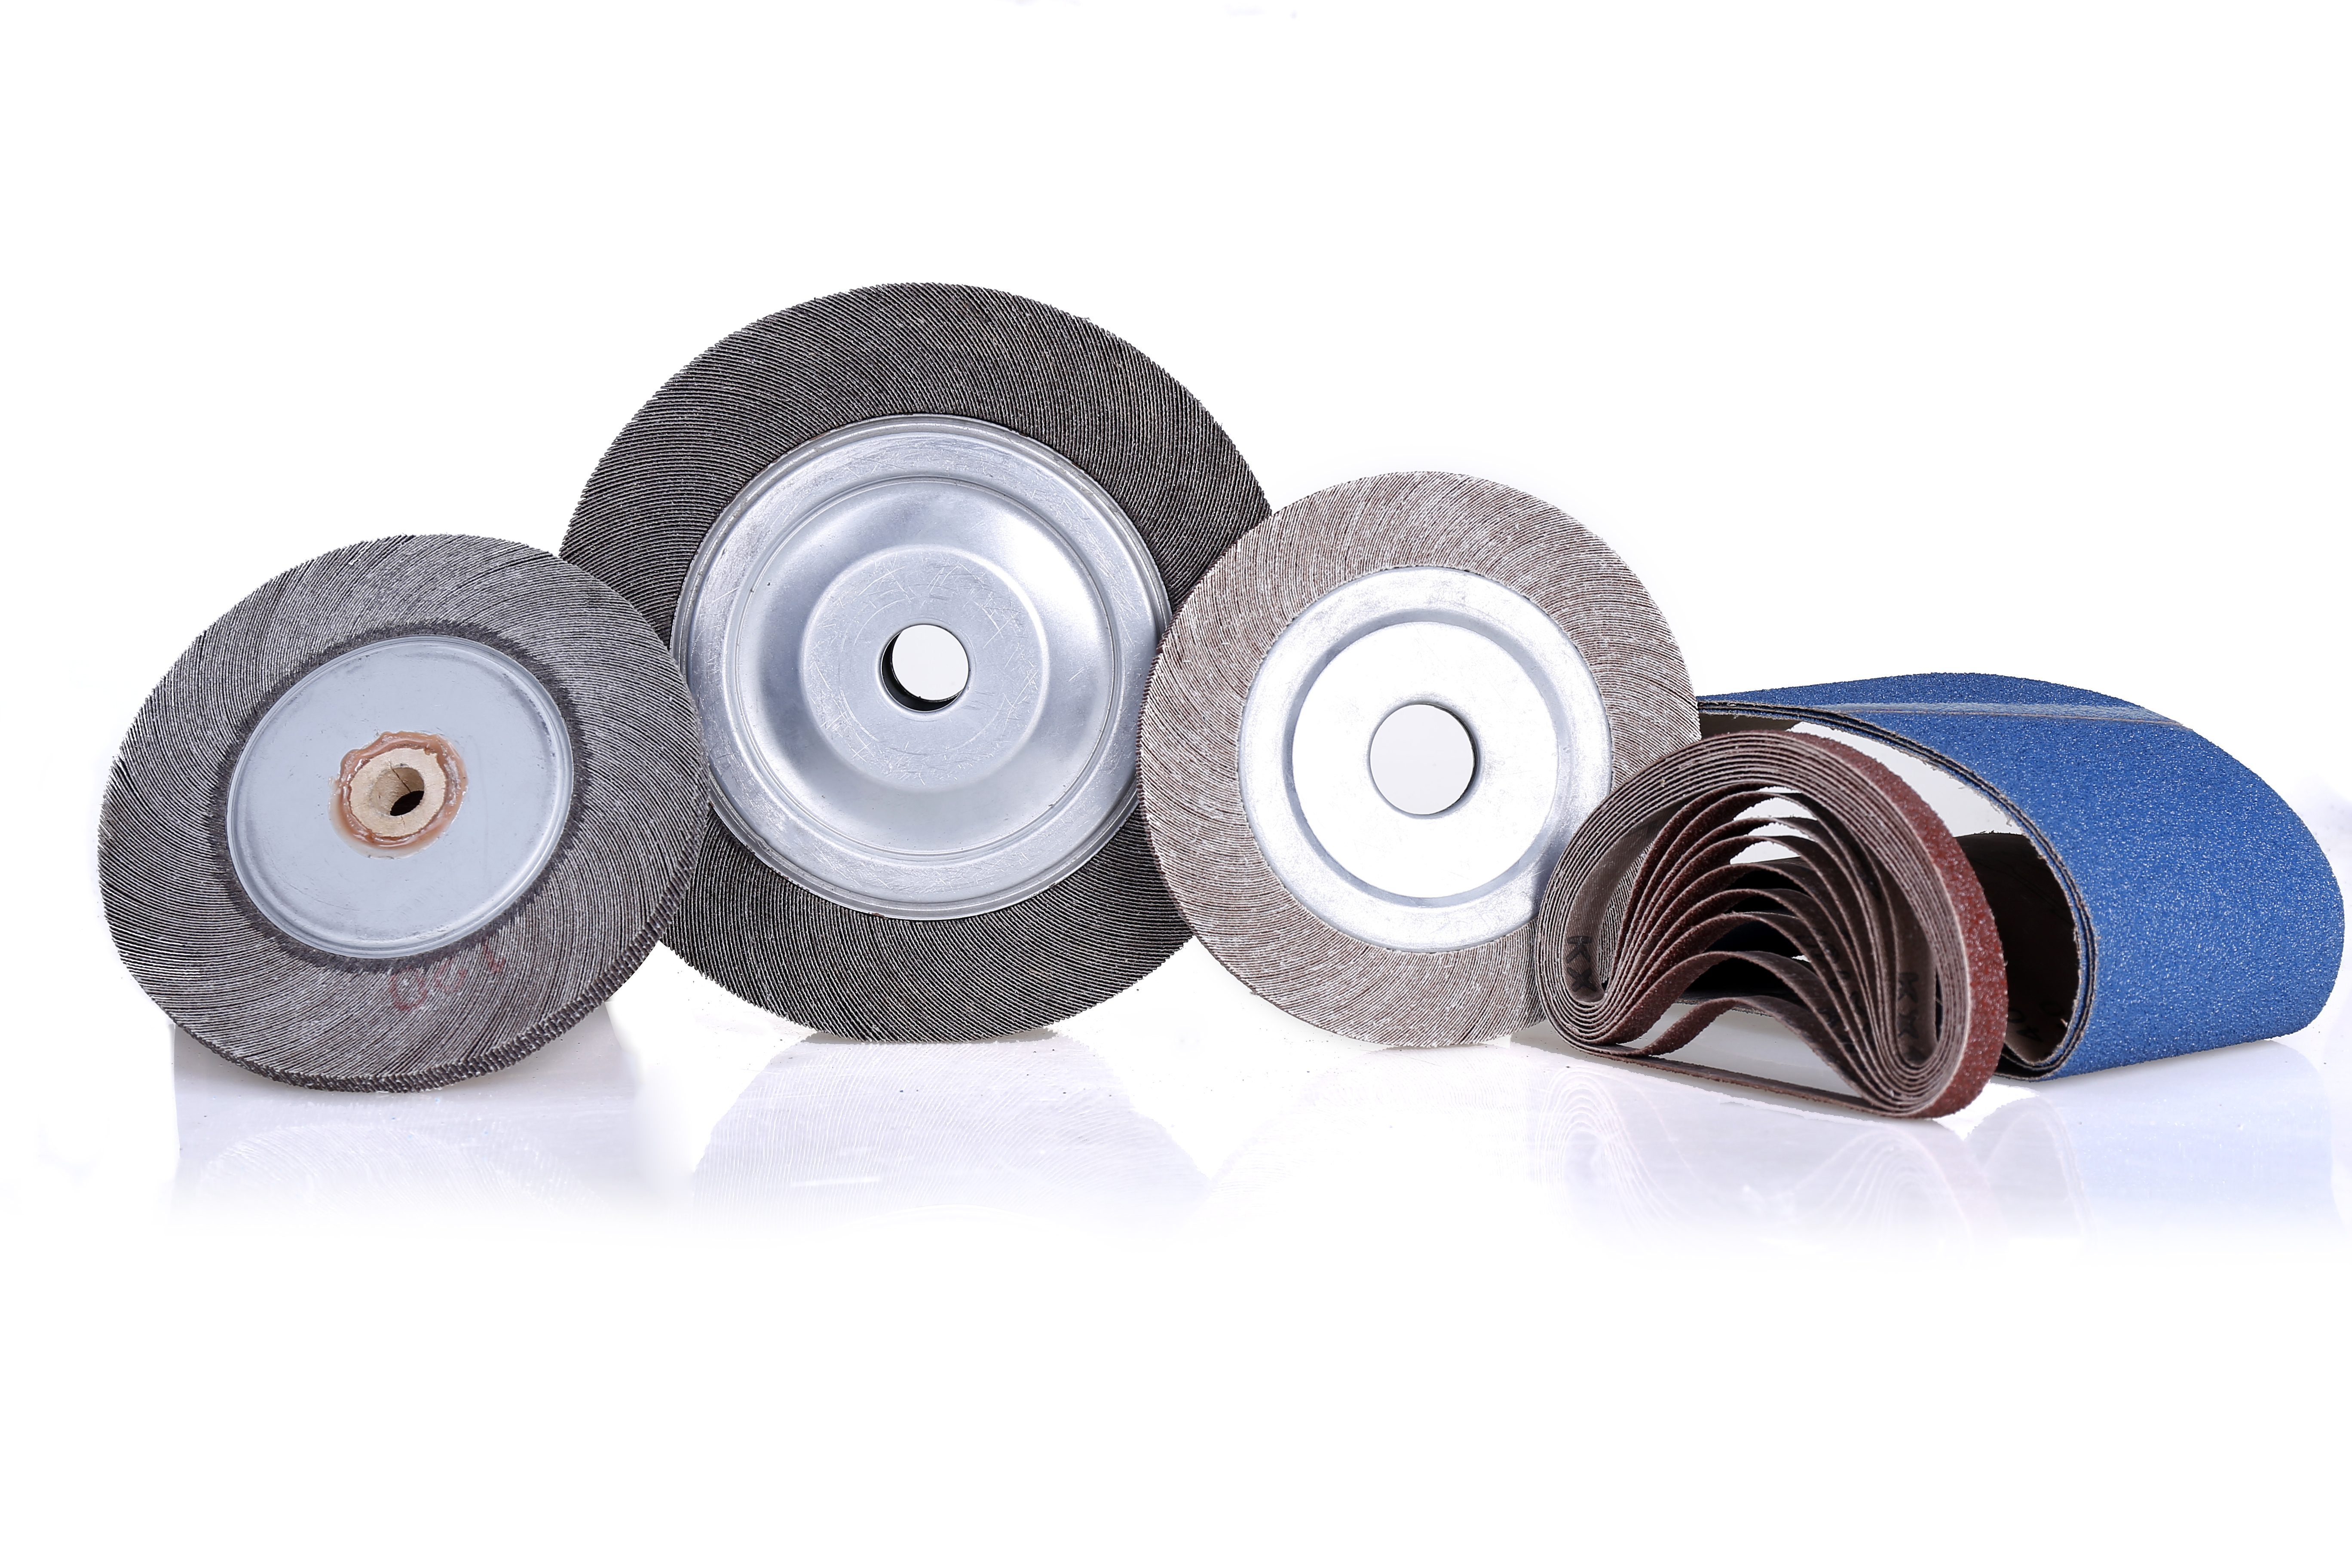 Abrasives are used in military industry_abrasive products_abrasive manufacturer_abrasive tools_polishing wheel factory